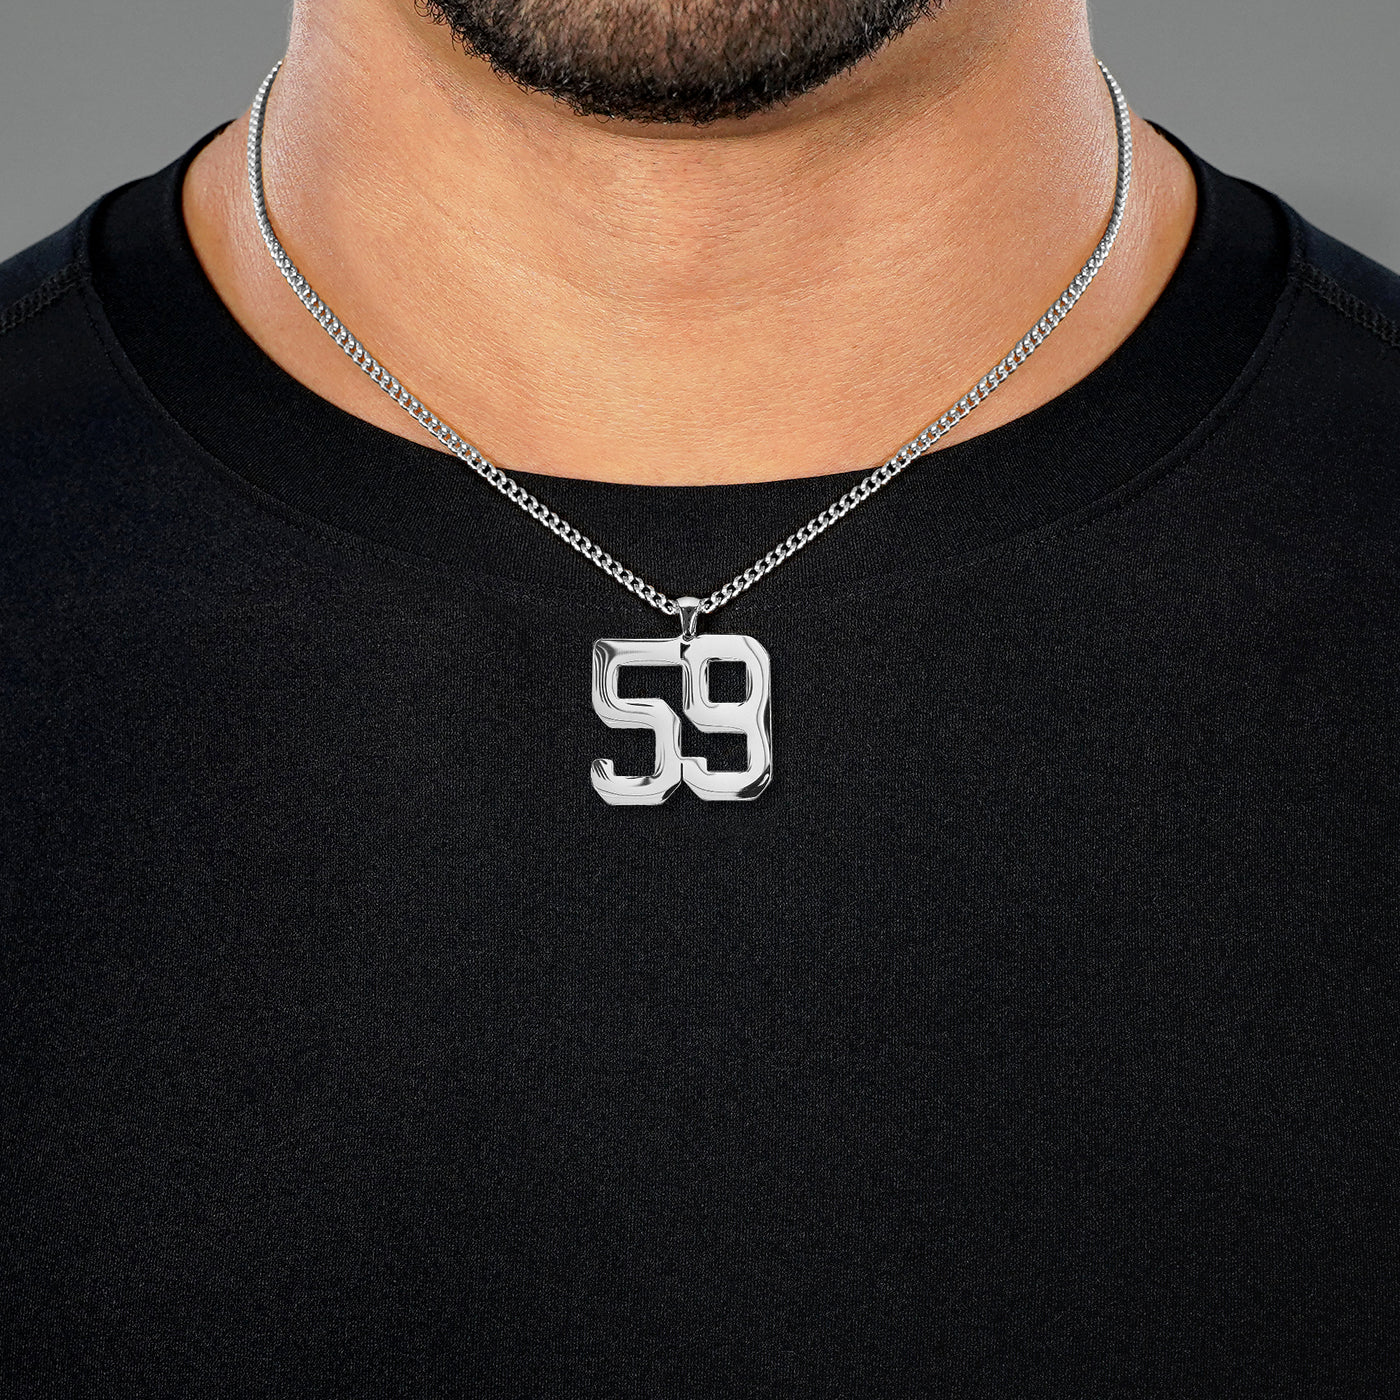 59 Number Pendant with Chain Necklace - Stainless Steel